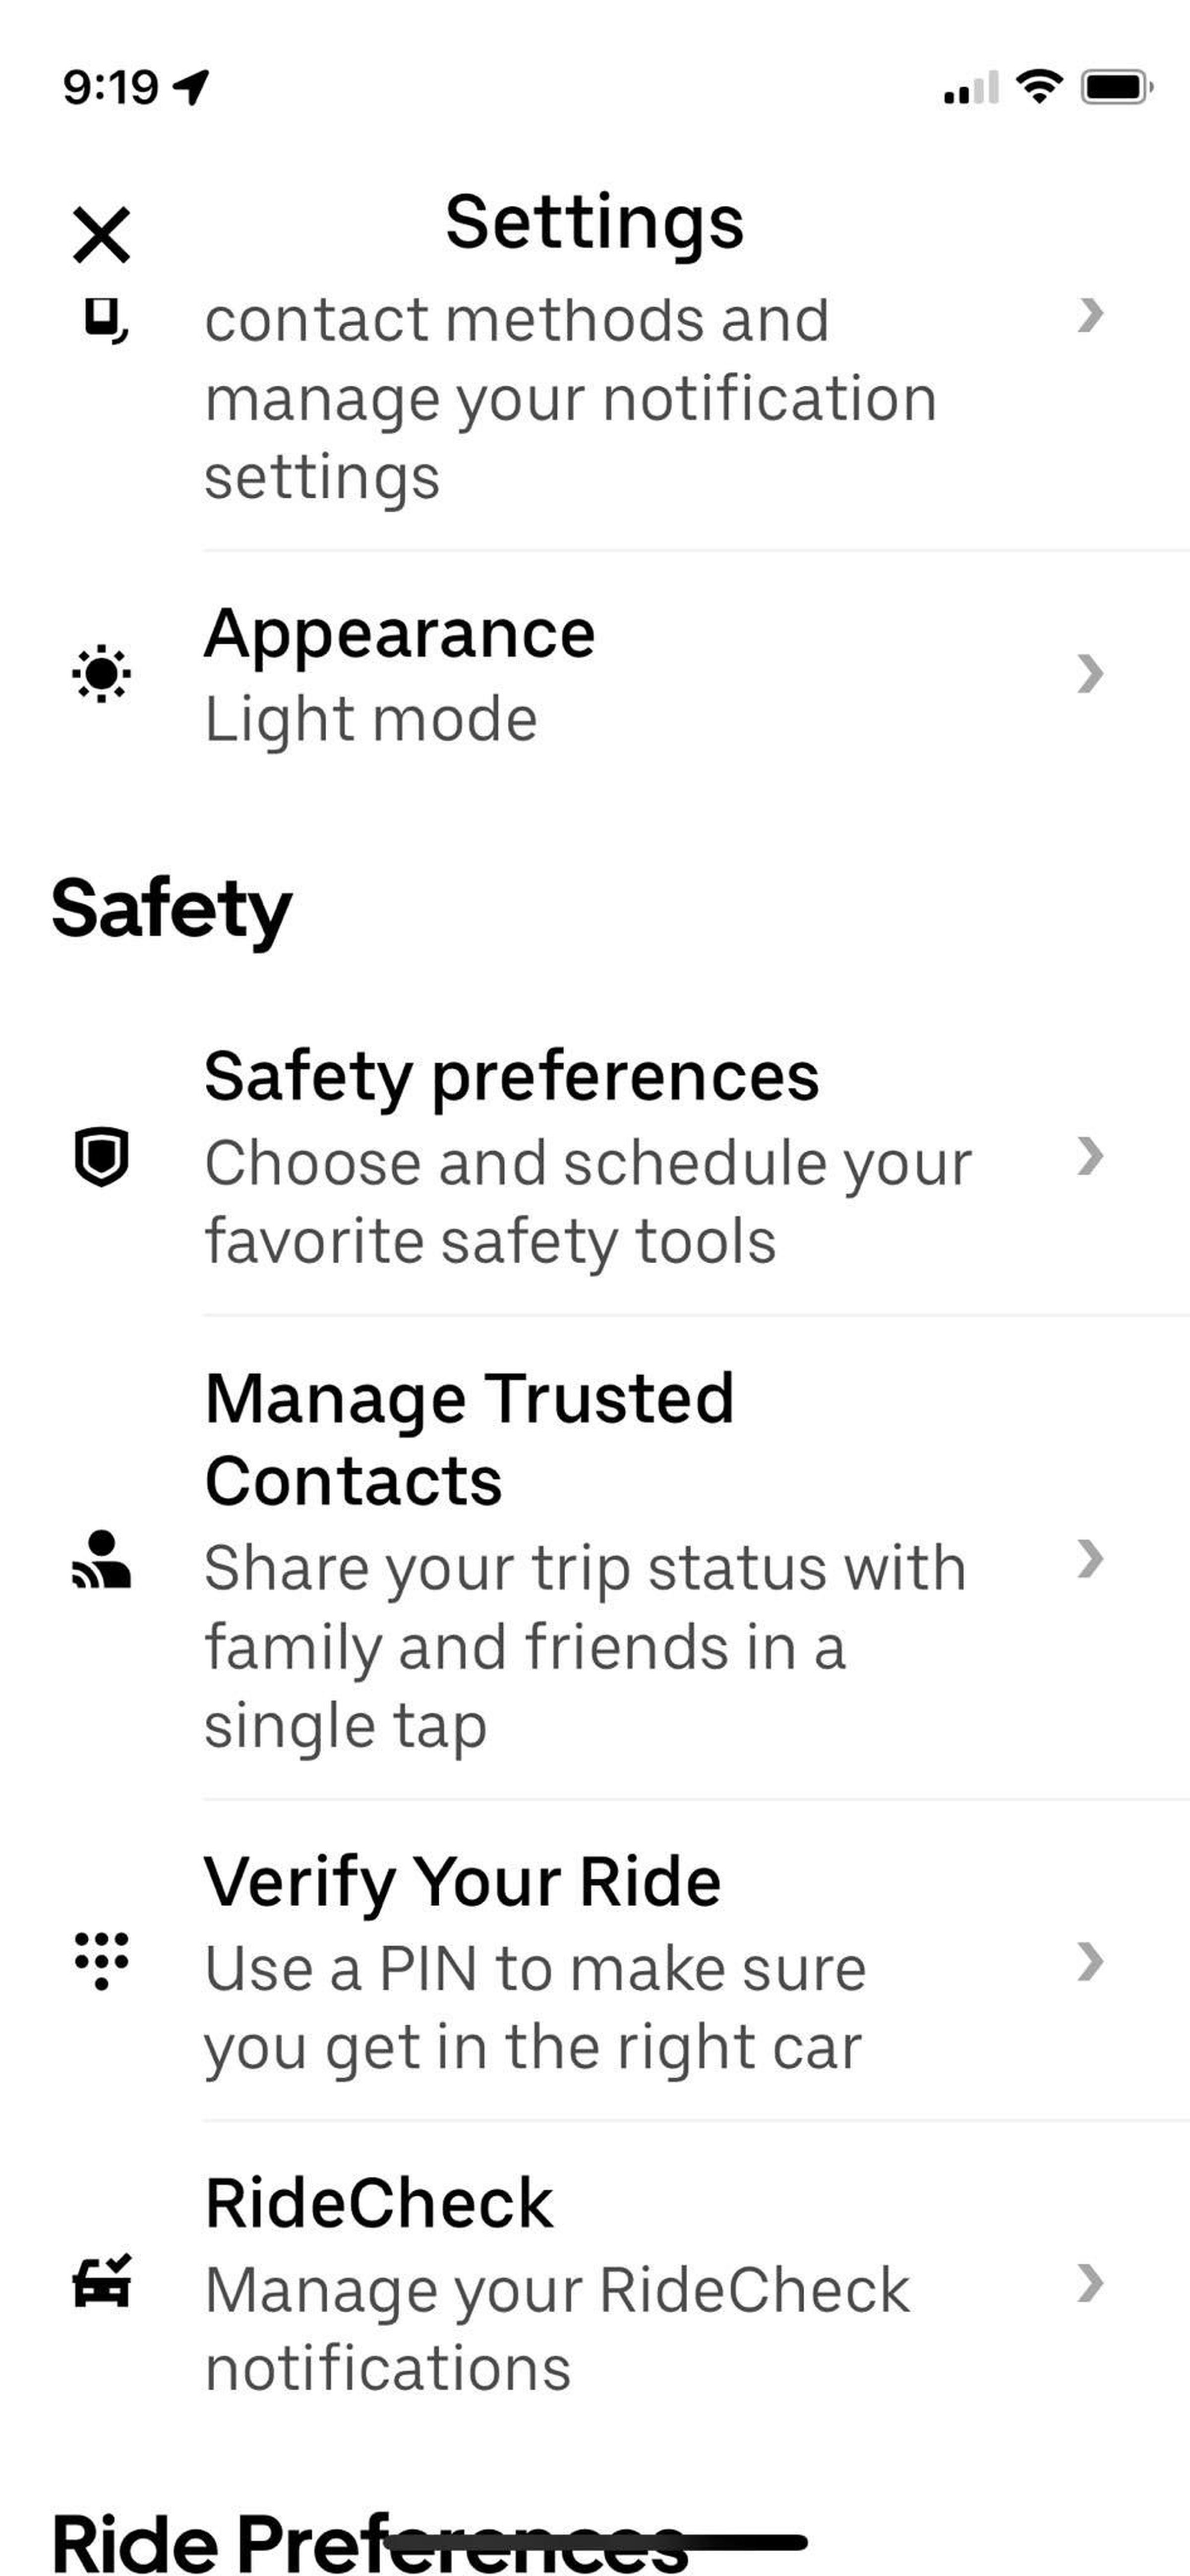 After selecting <strong>Settings</strong>, scroll down to the <strong>Safety </strong>section and click on <strong>Safety preferences.</strong>